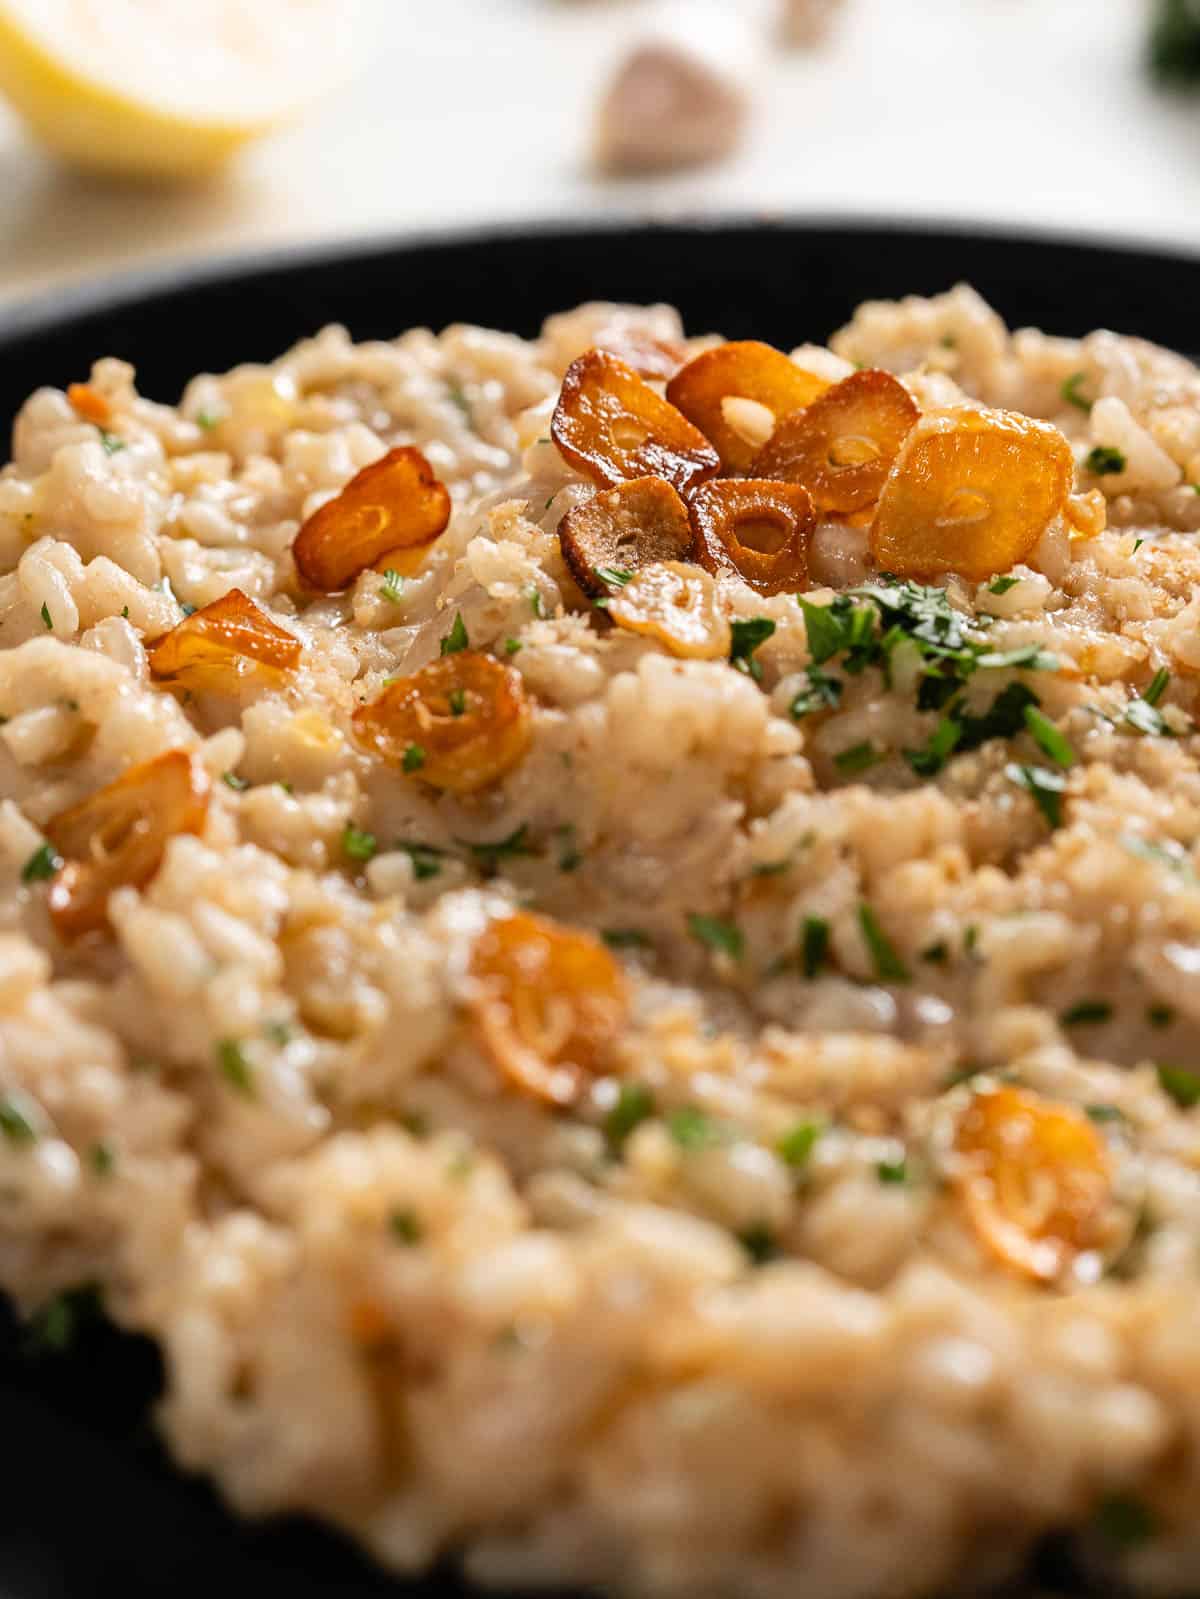 add toasted garlic flakes on top of the garlic risotto to garnish.